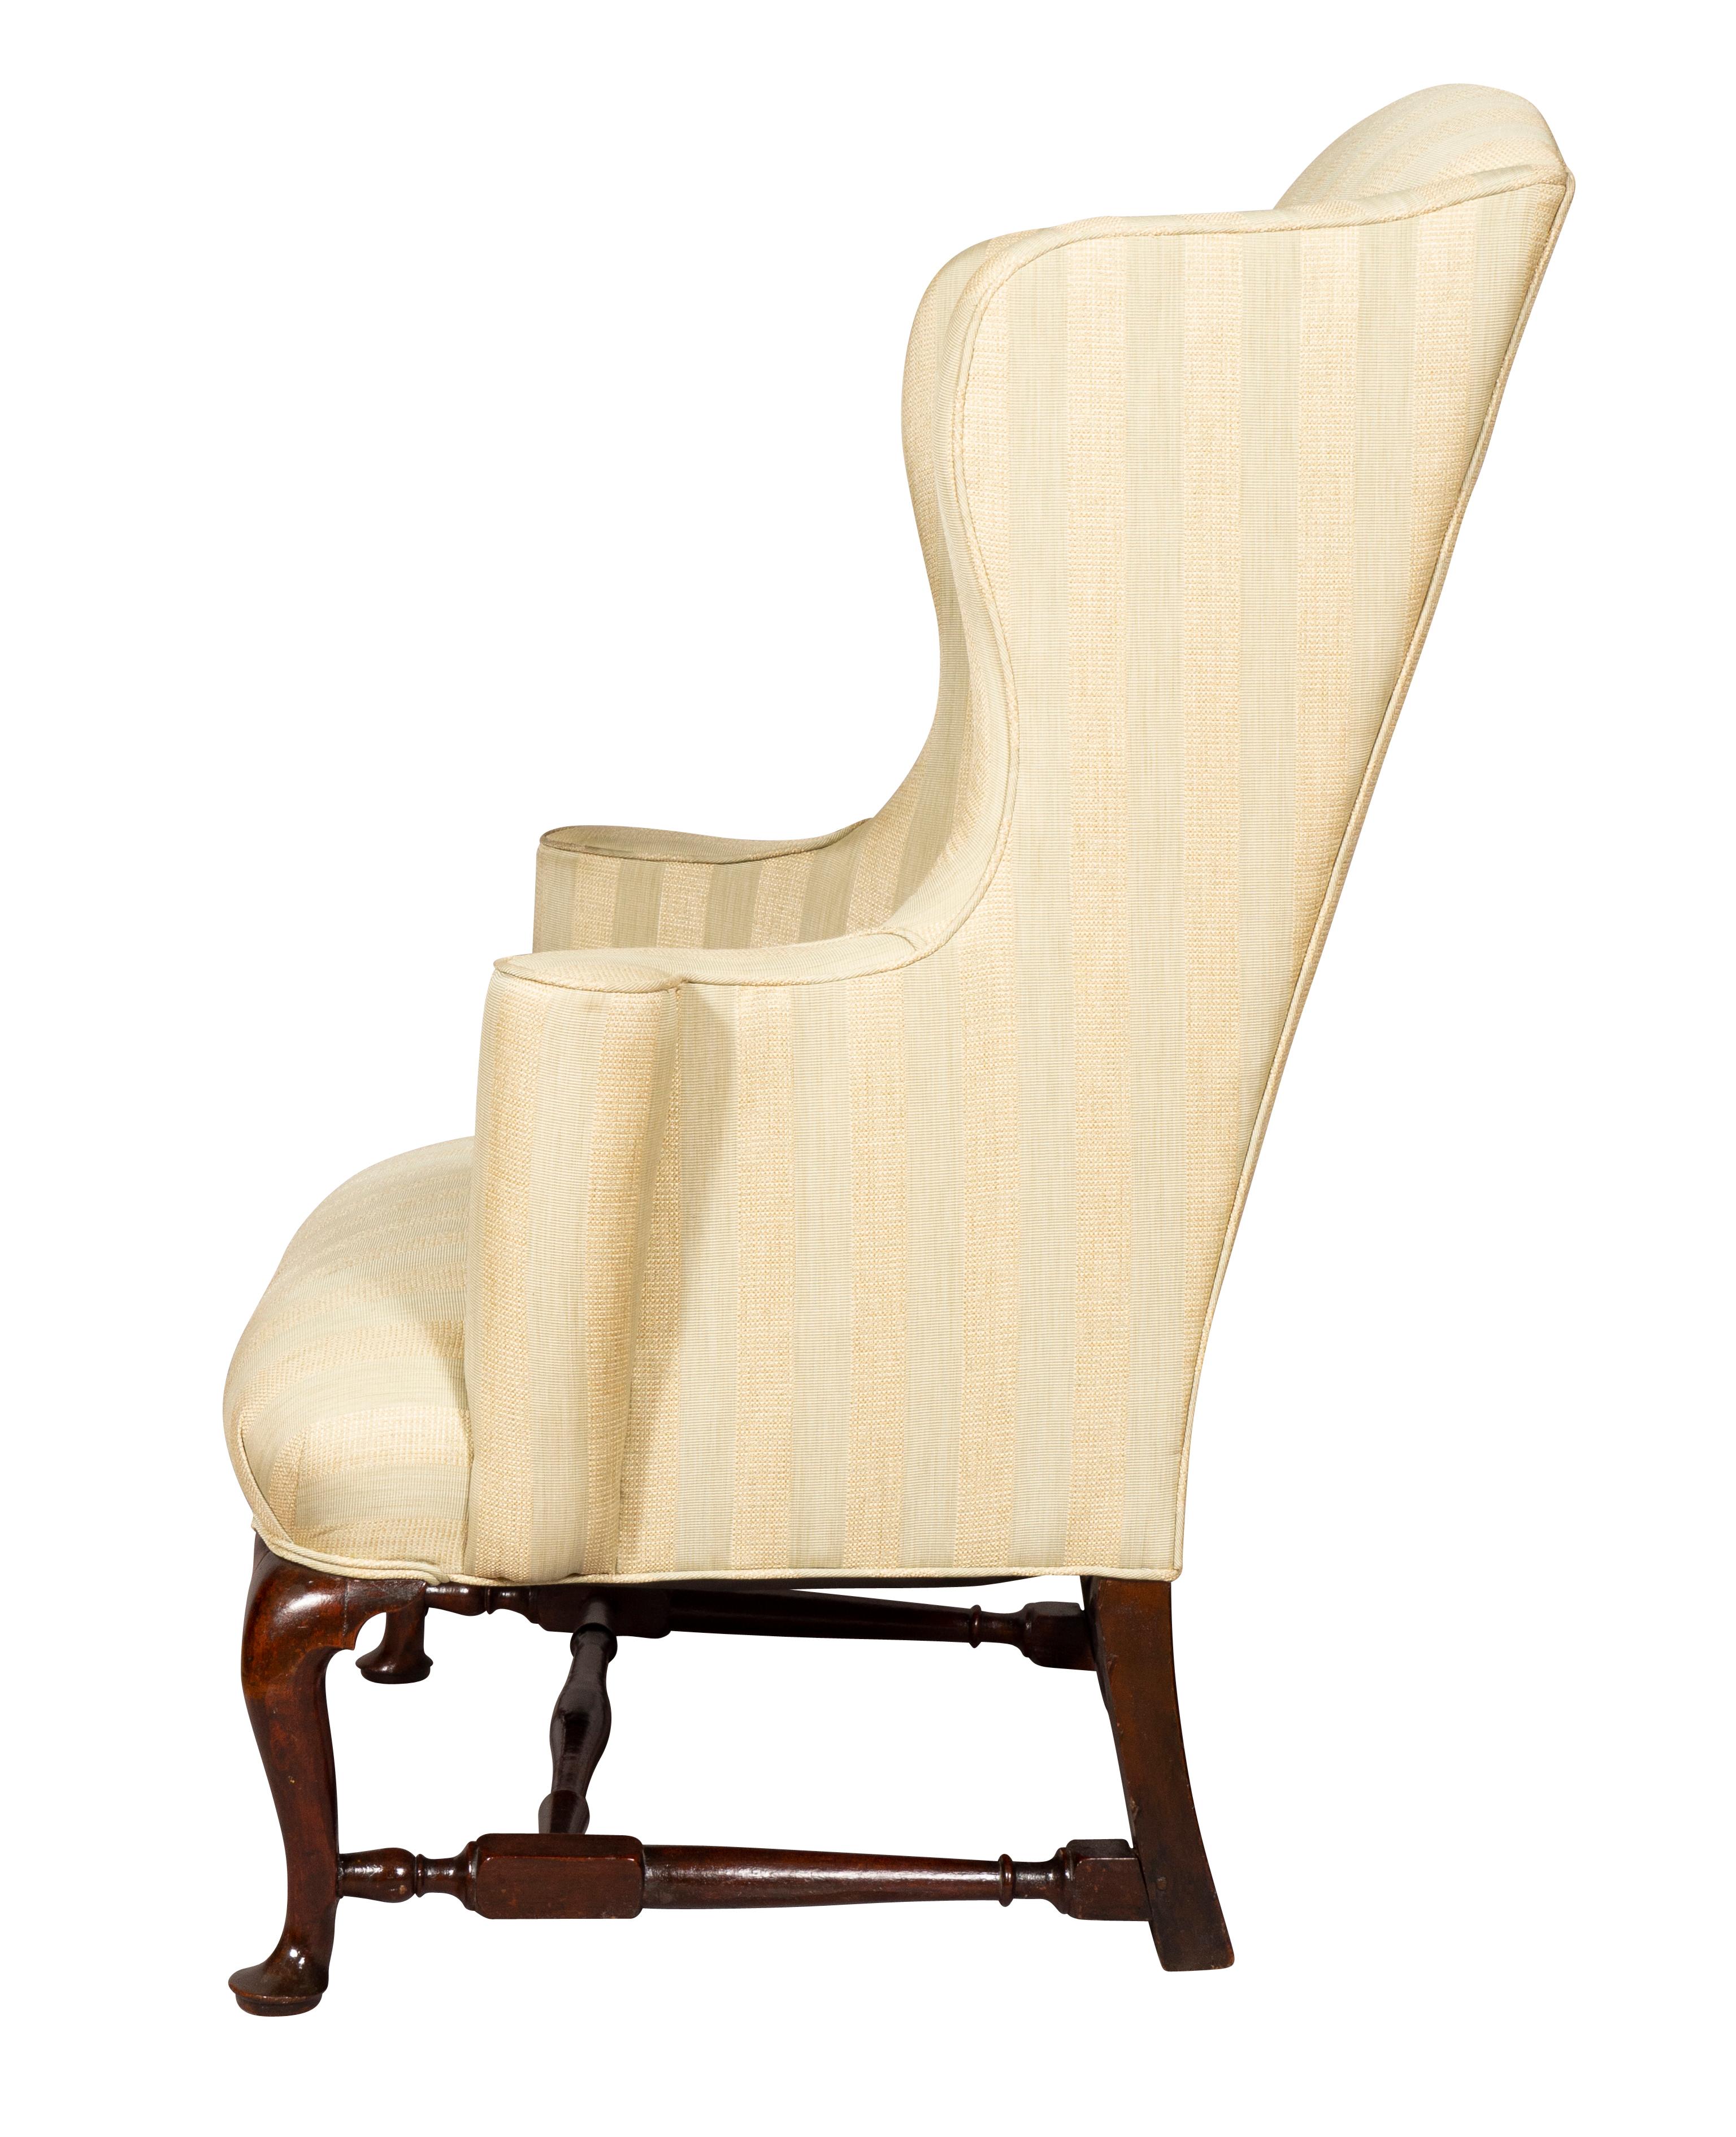 18th Century Massachusetts Queen Anne Mahogany Wing Chair